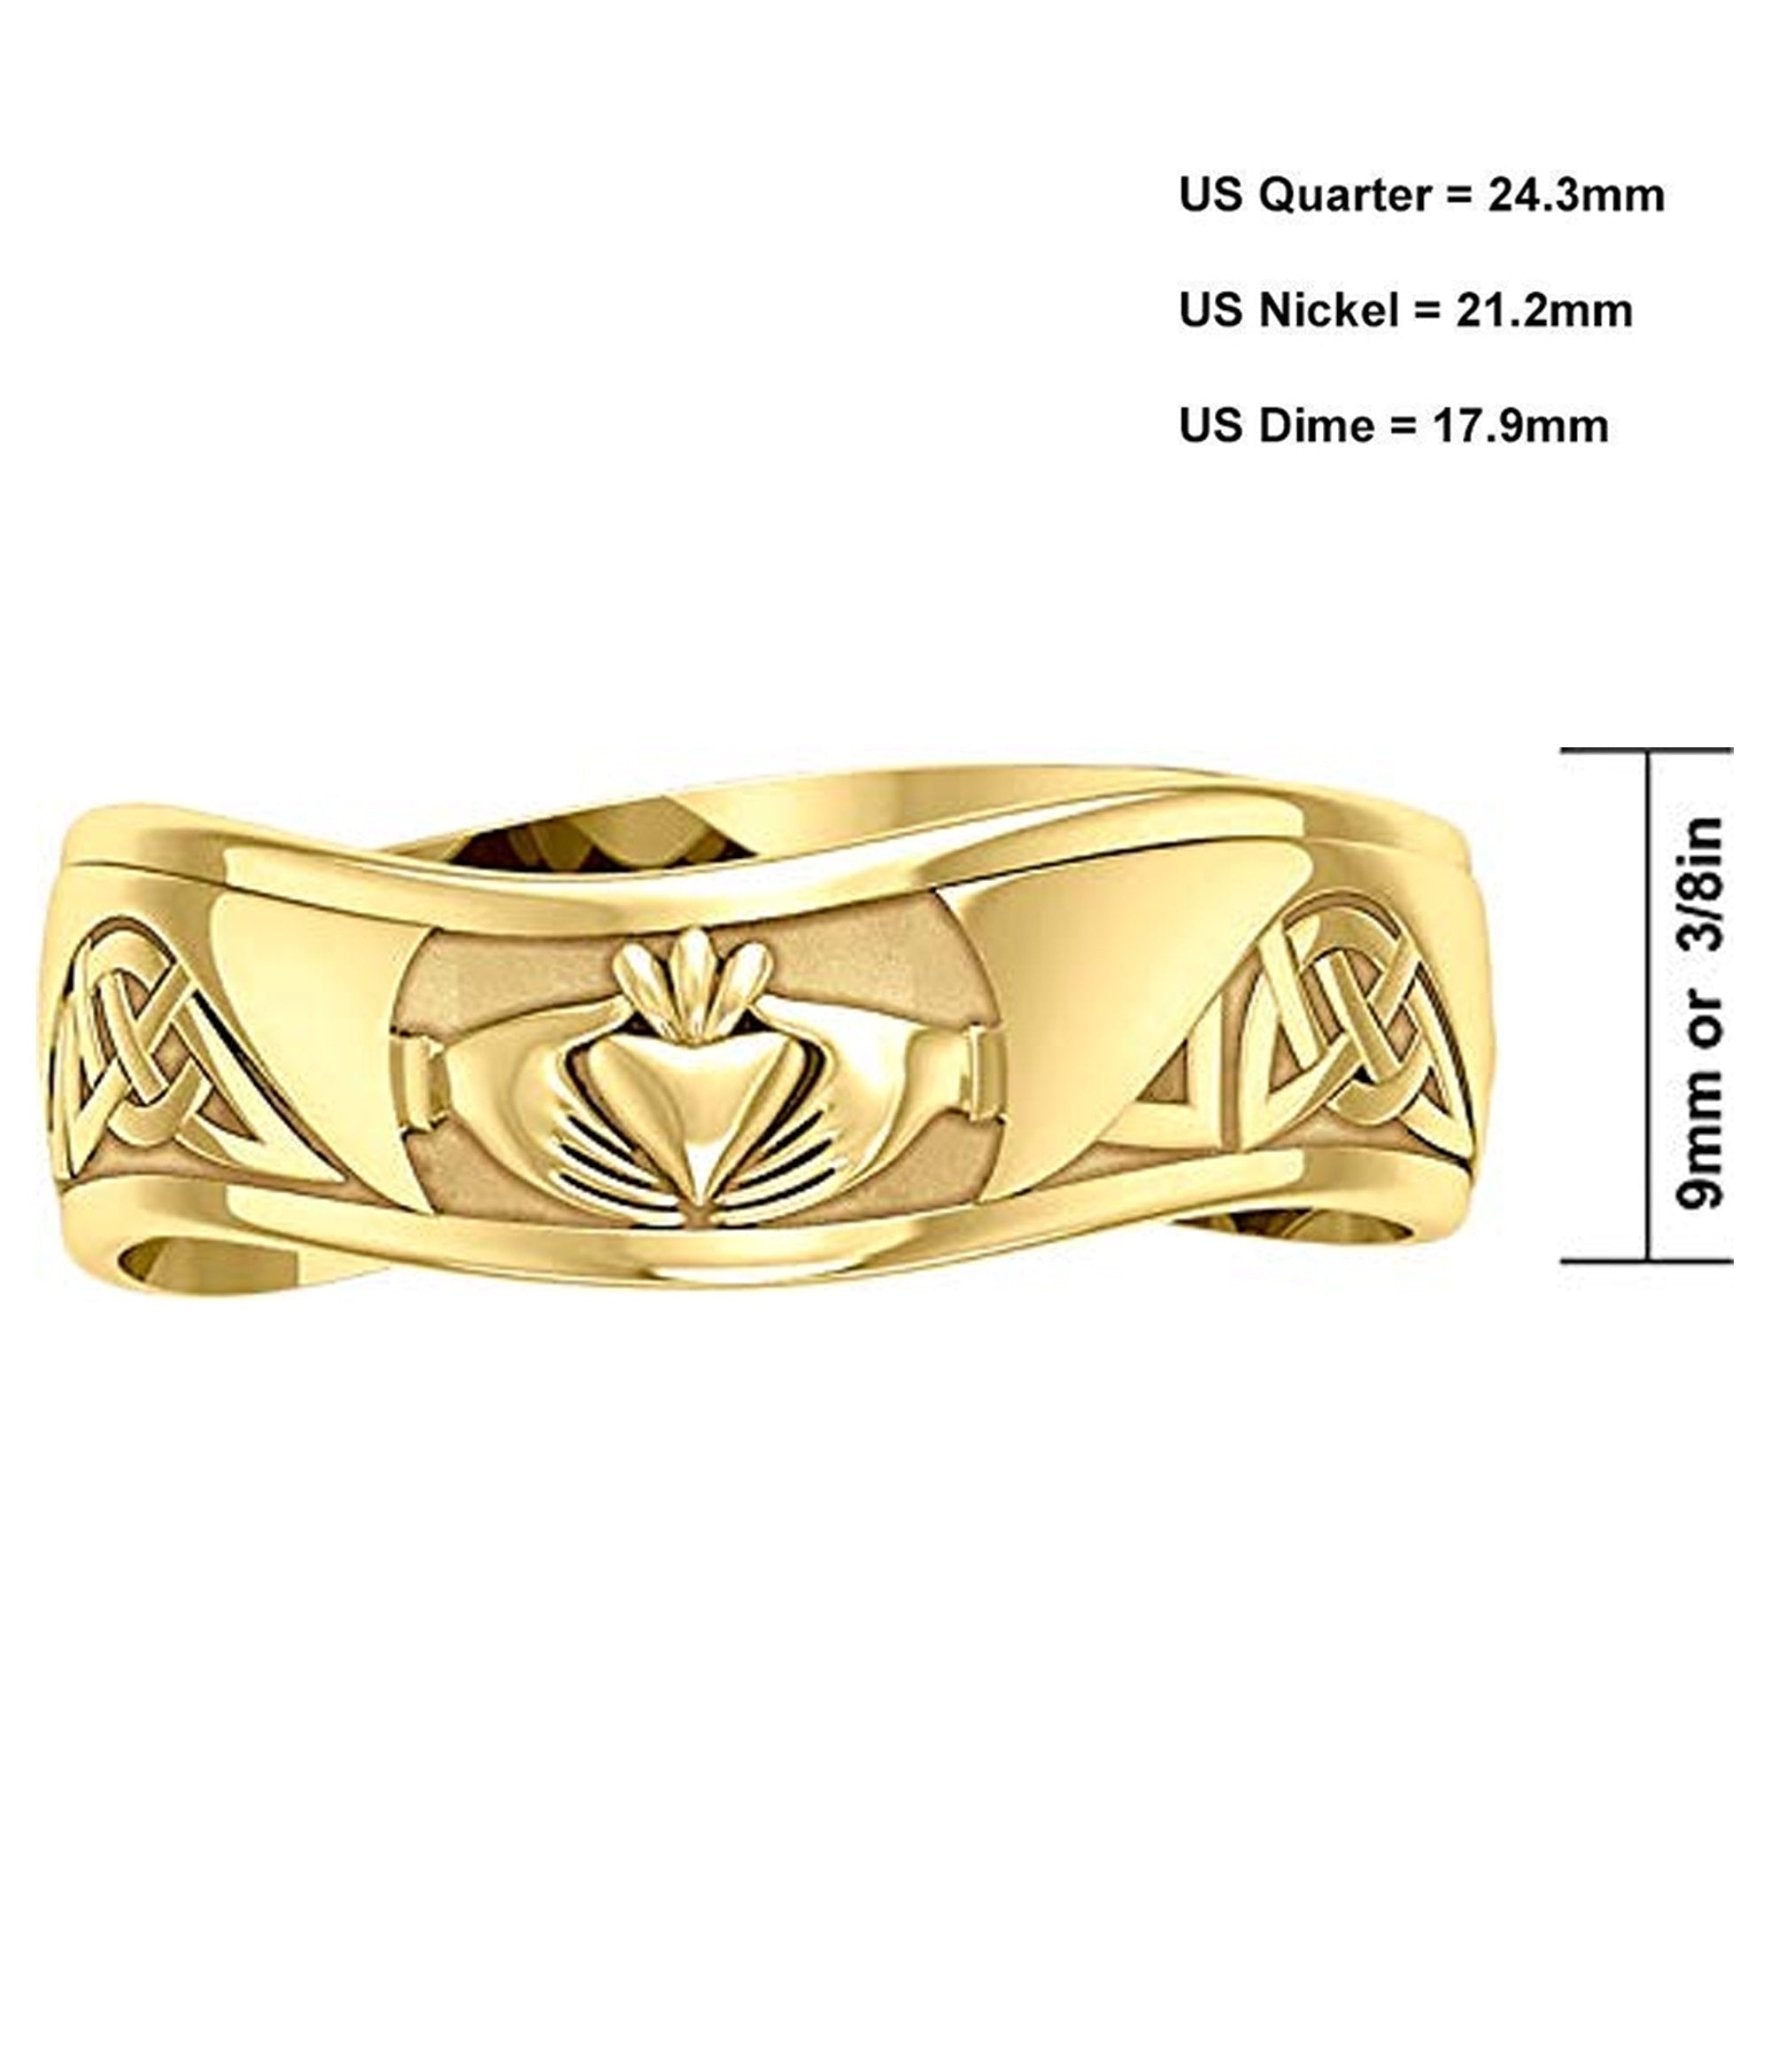 Men's 10k or 14k Yellow or White Gold Modern Irish Celtic Claddagh & Knot Ring Band - US Jewels